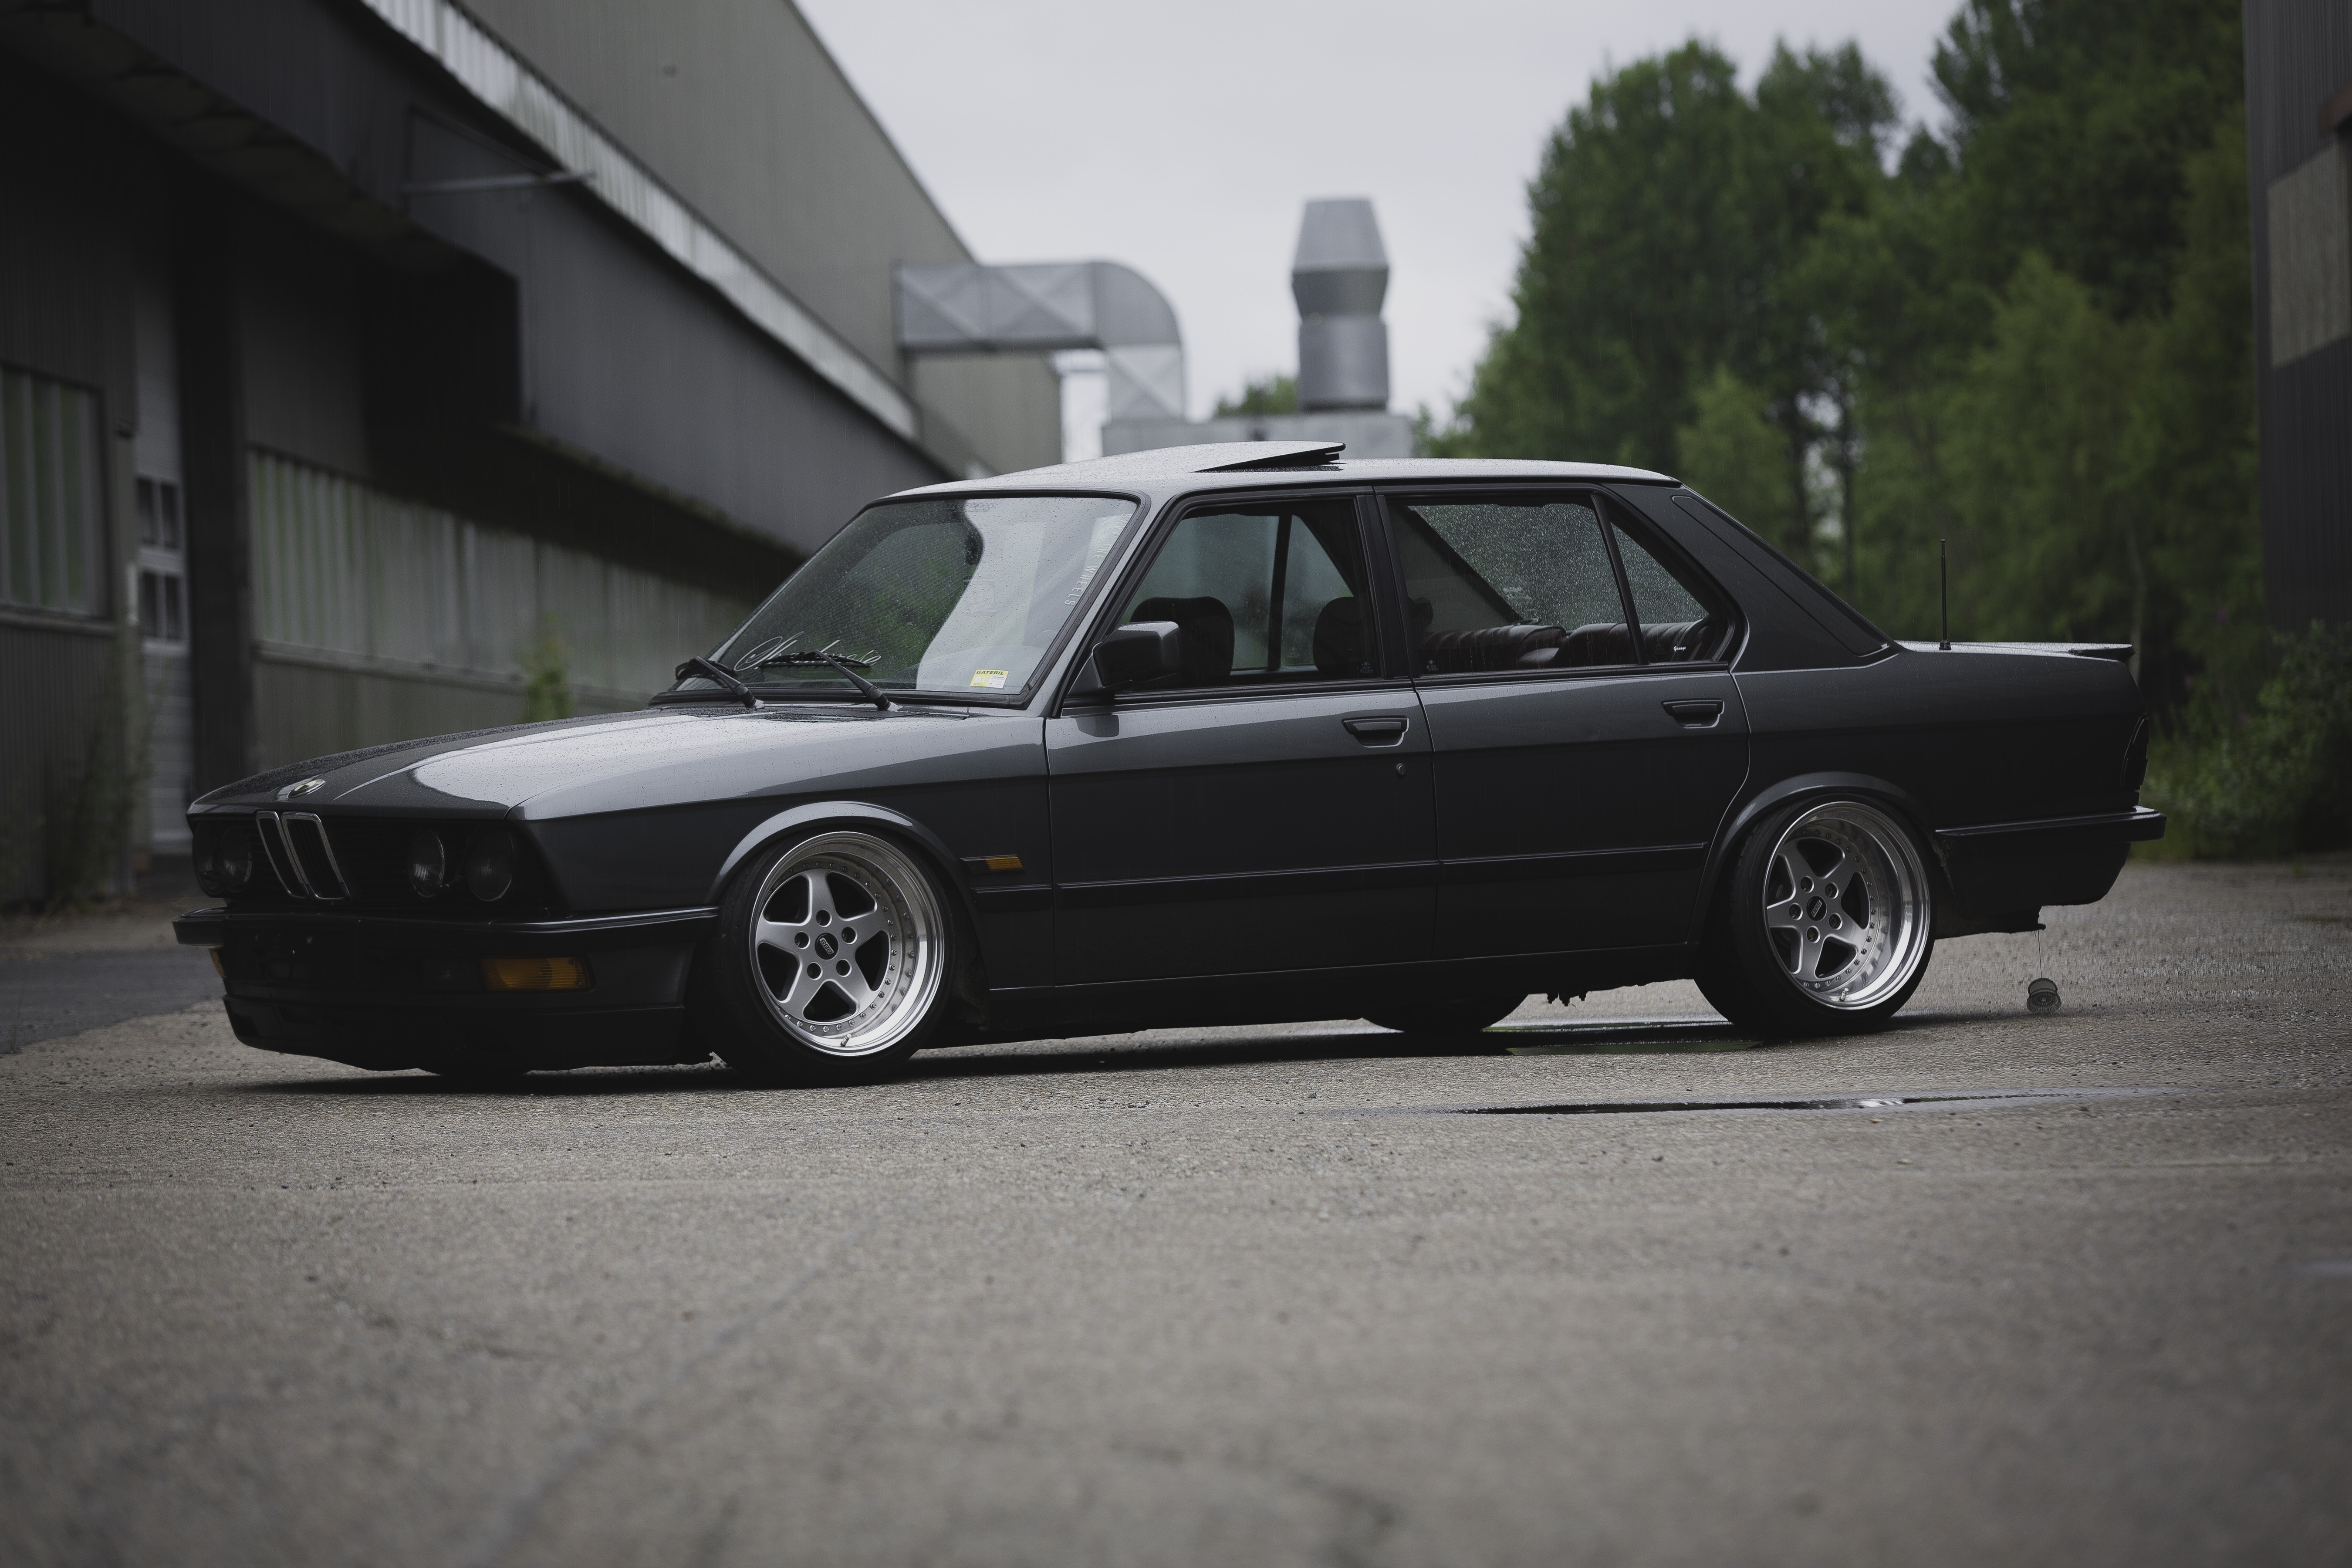 BMW E28, Stance, Stanceworks, Static, Low, Savethewheels, Norway, Summer Wallpaper